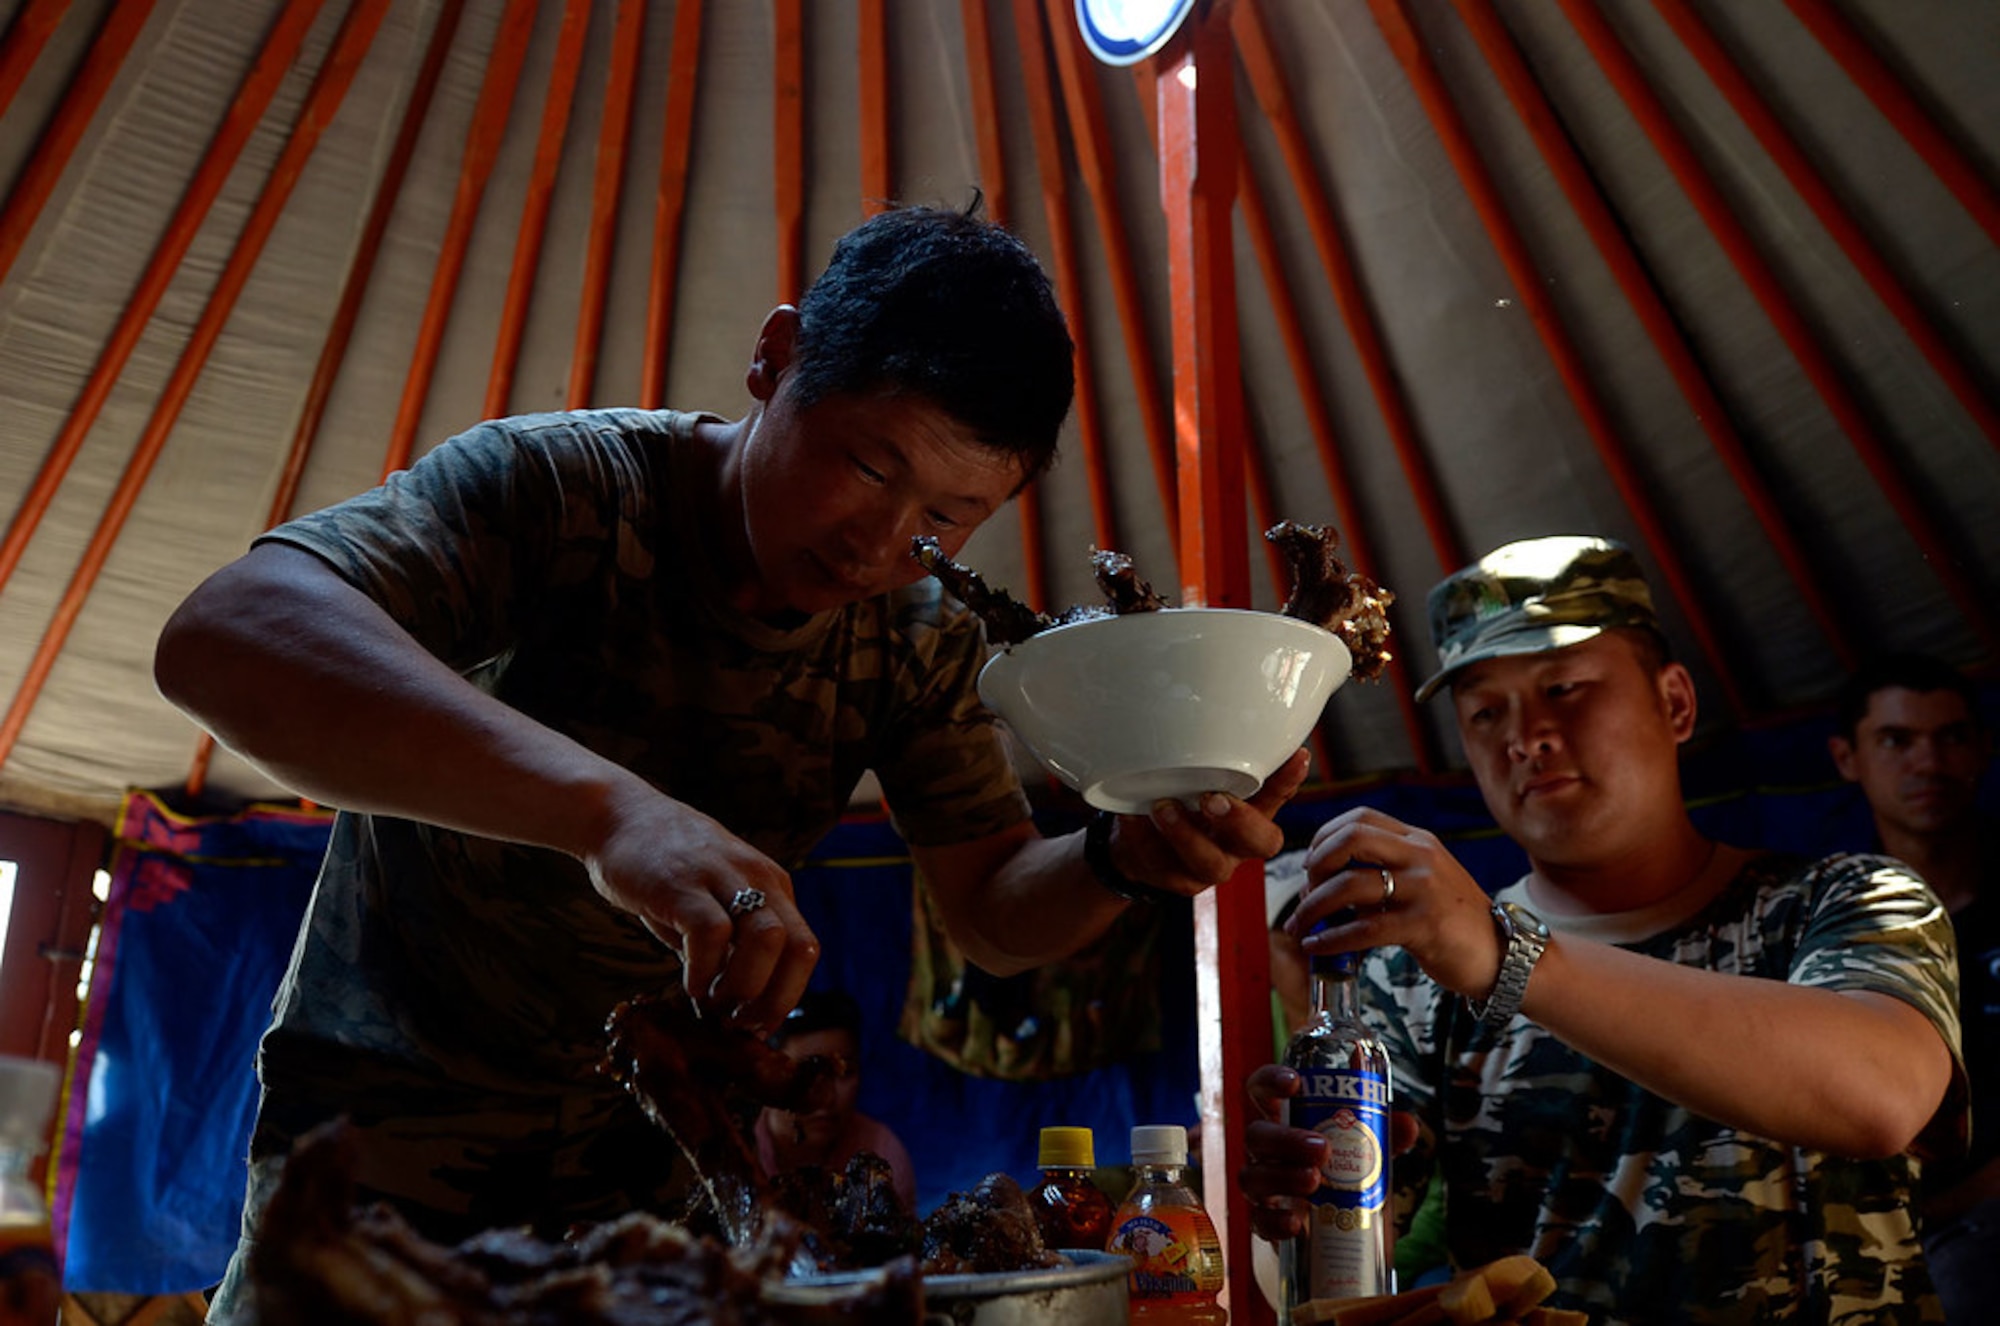 A couple of Mongolian Border Forces cut and prepare some mutton for lunch. Mongolians' diet relies heavily on meat and dairy products, The meat-dependent diet arises from the need for hearty food to stave off the cold and long winters.(U.S. Air Force photo/Master Sgt. Jeremy T. Lock)